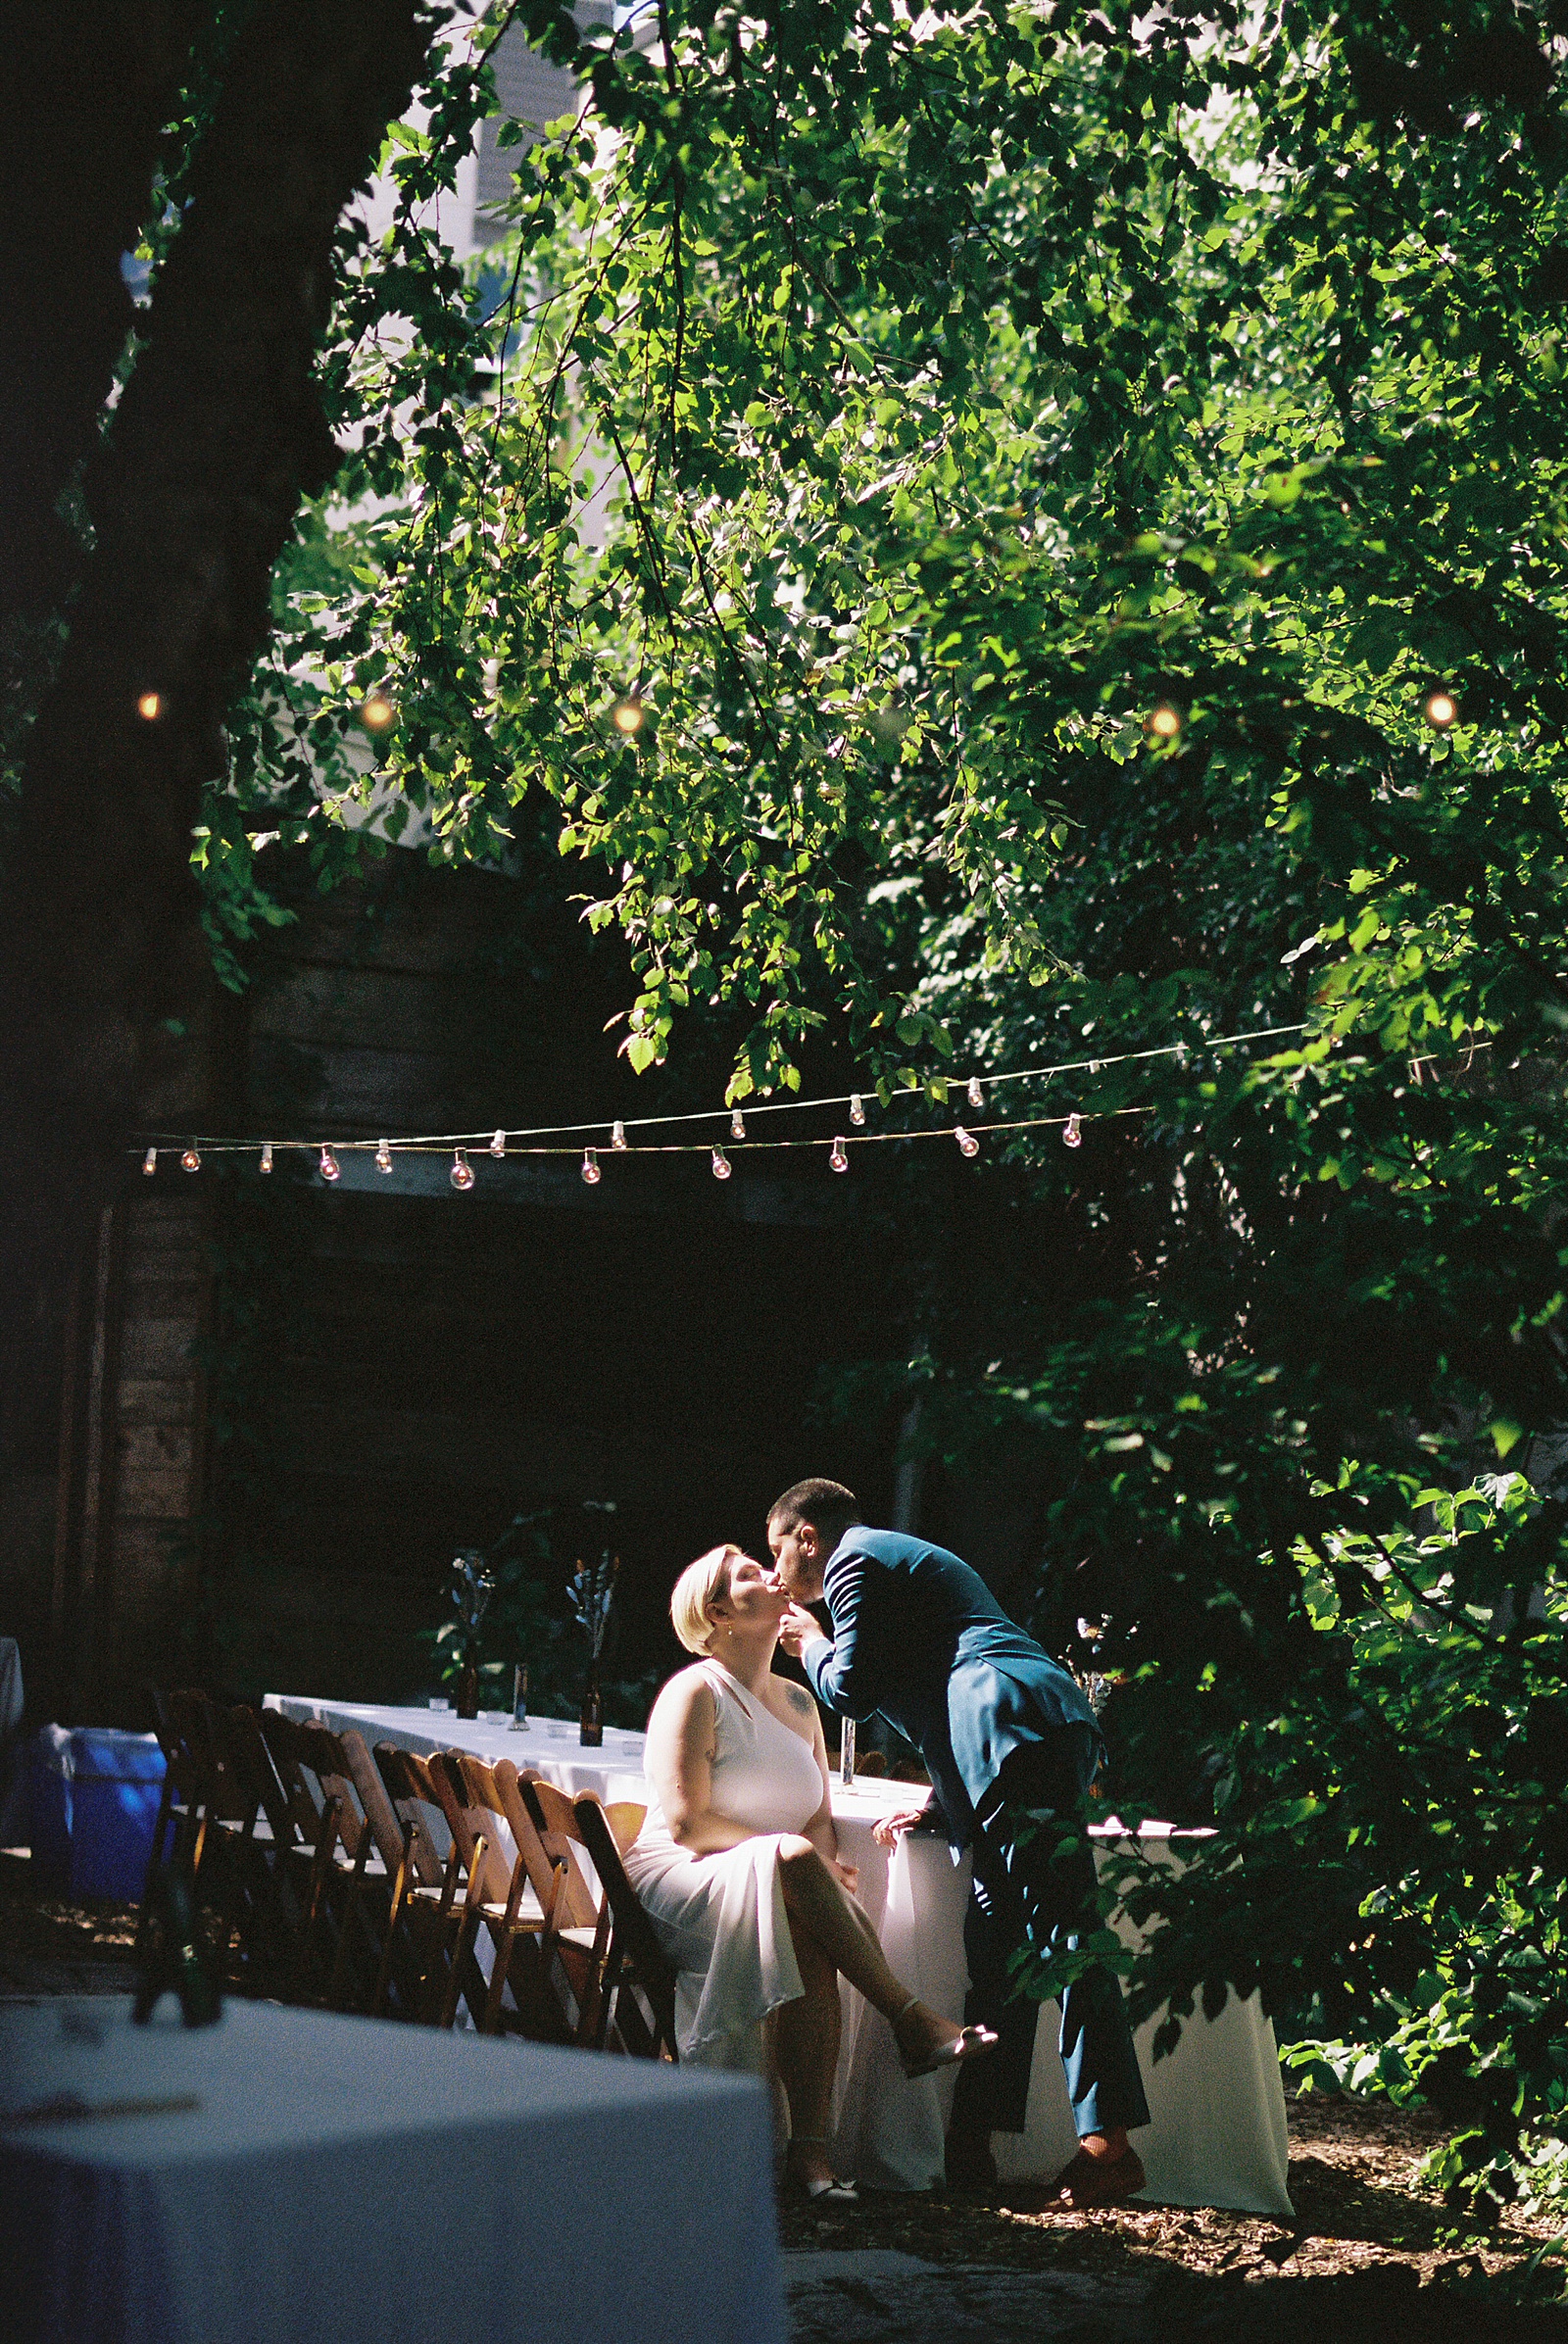 A marrier leans down and kisses a bride seated at a reception table in a Philadelphia wedding venue.